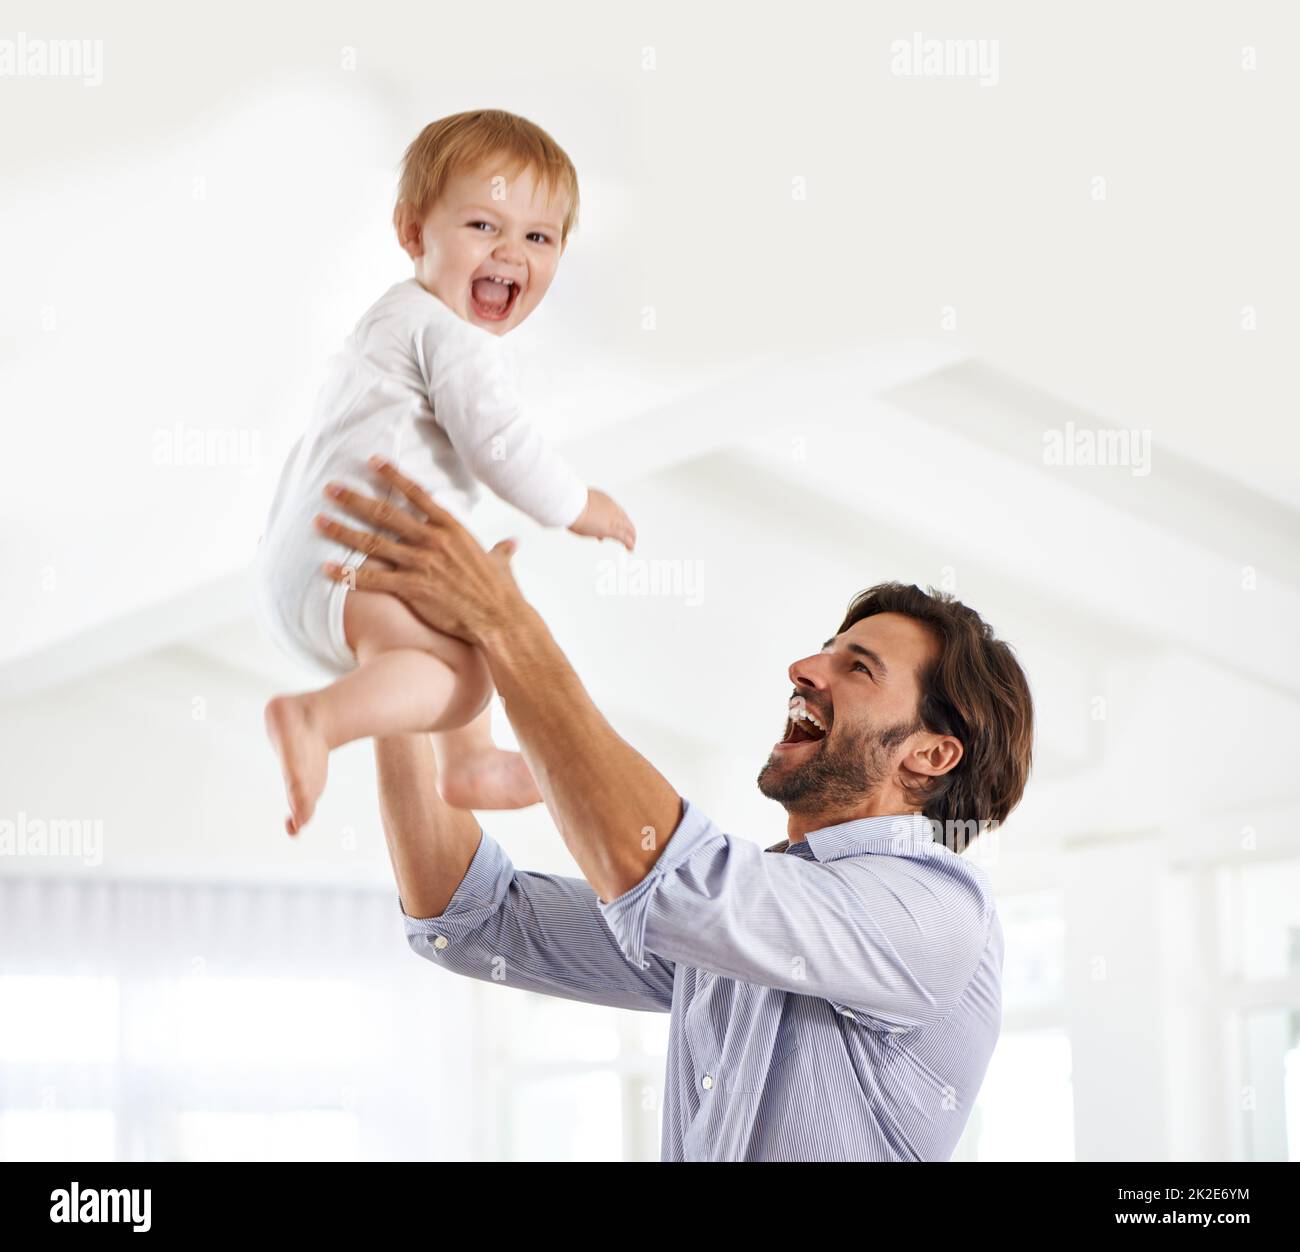 Daddy daycare. Shot of a young father spending time with his baby boy. Stock Photo